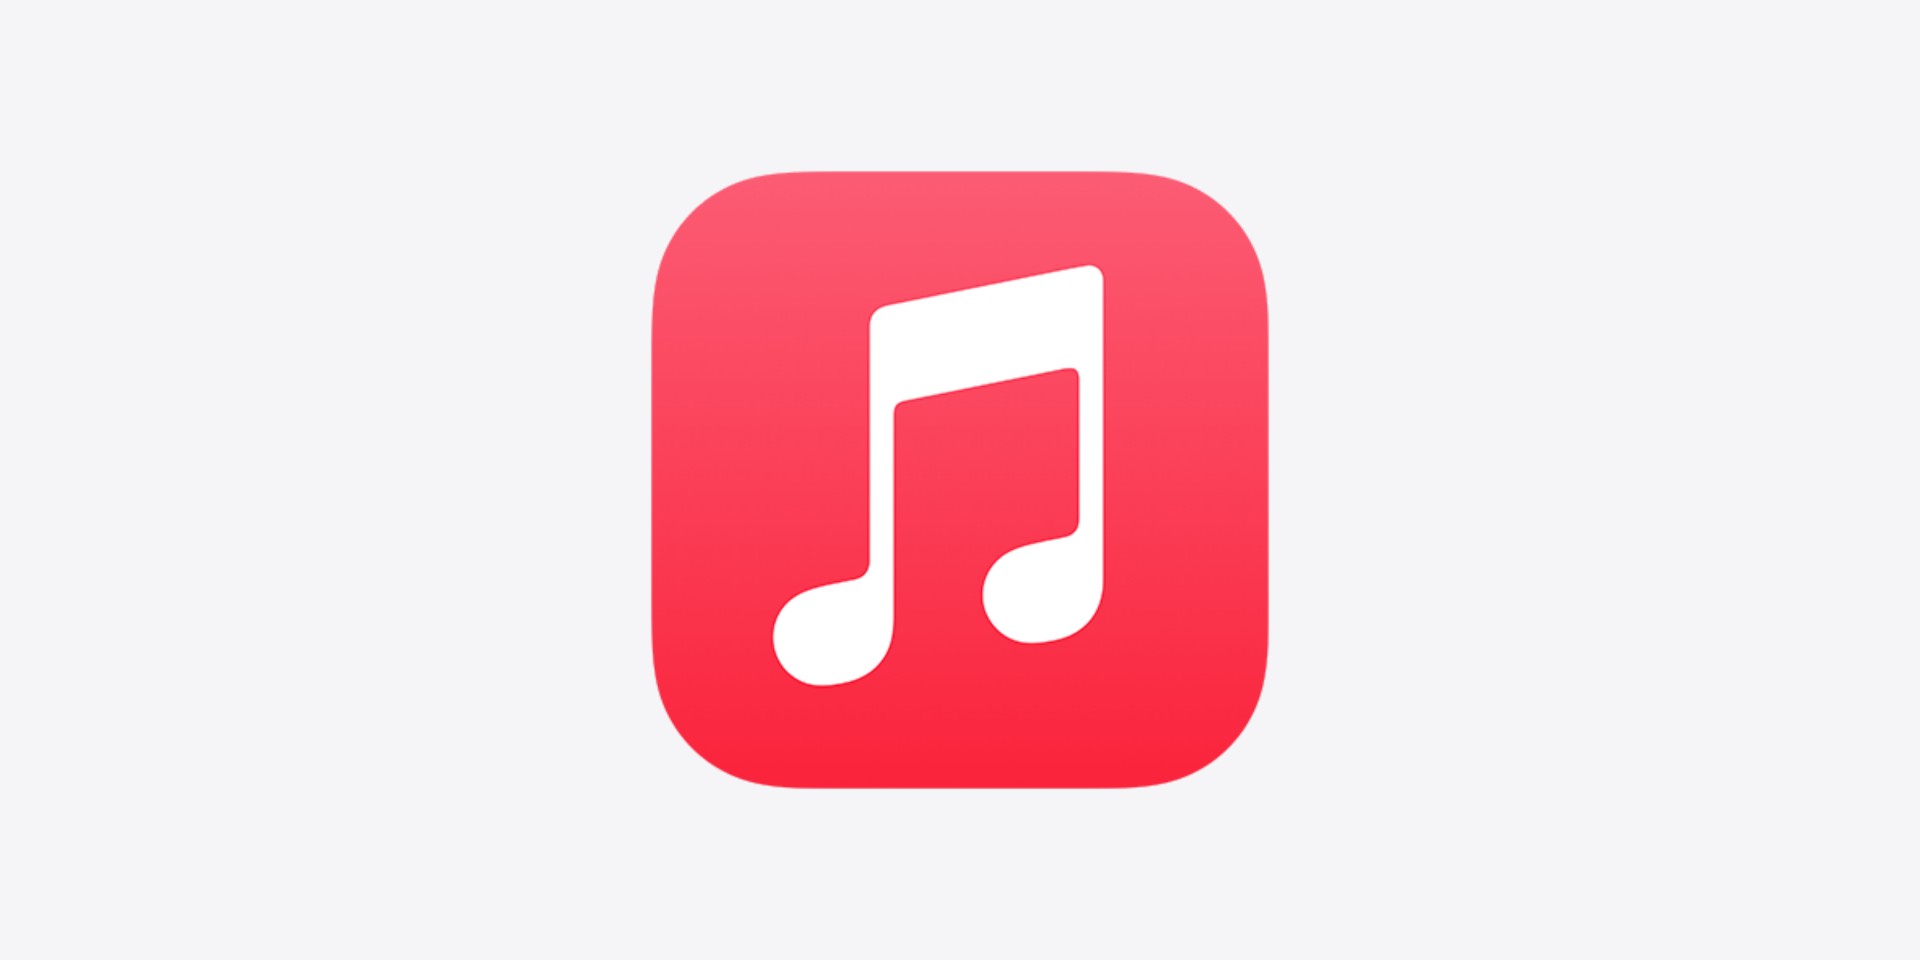 Here's what's new on Apple Music with iOS 15: Spatial Audio, SharePlay, new 'Memories' feature, and more